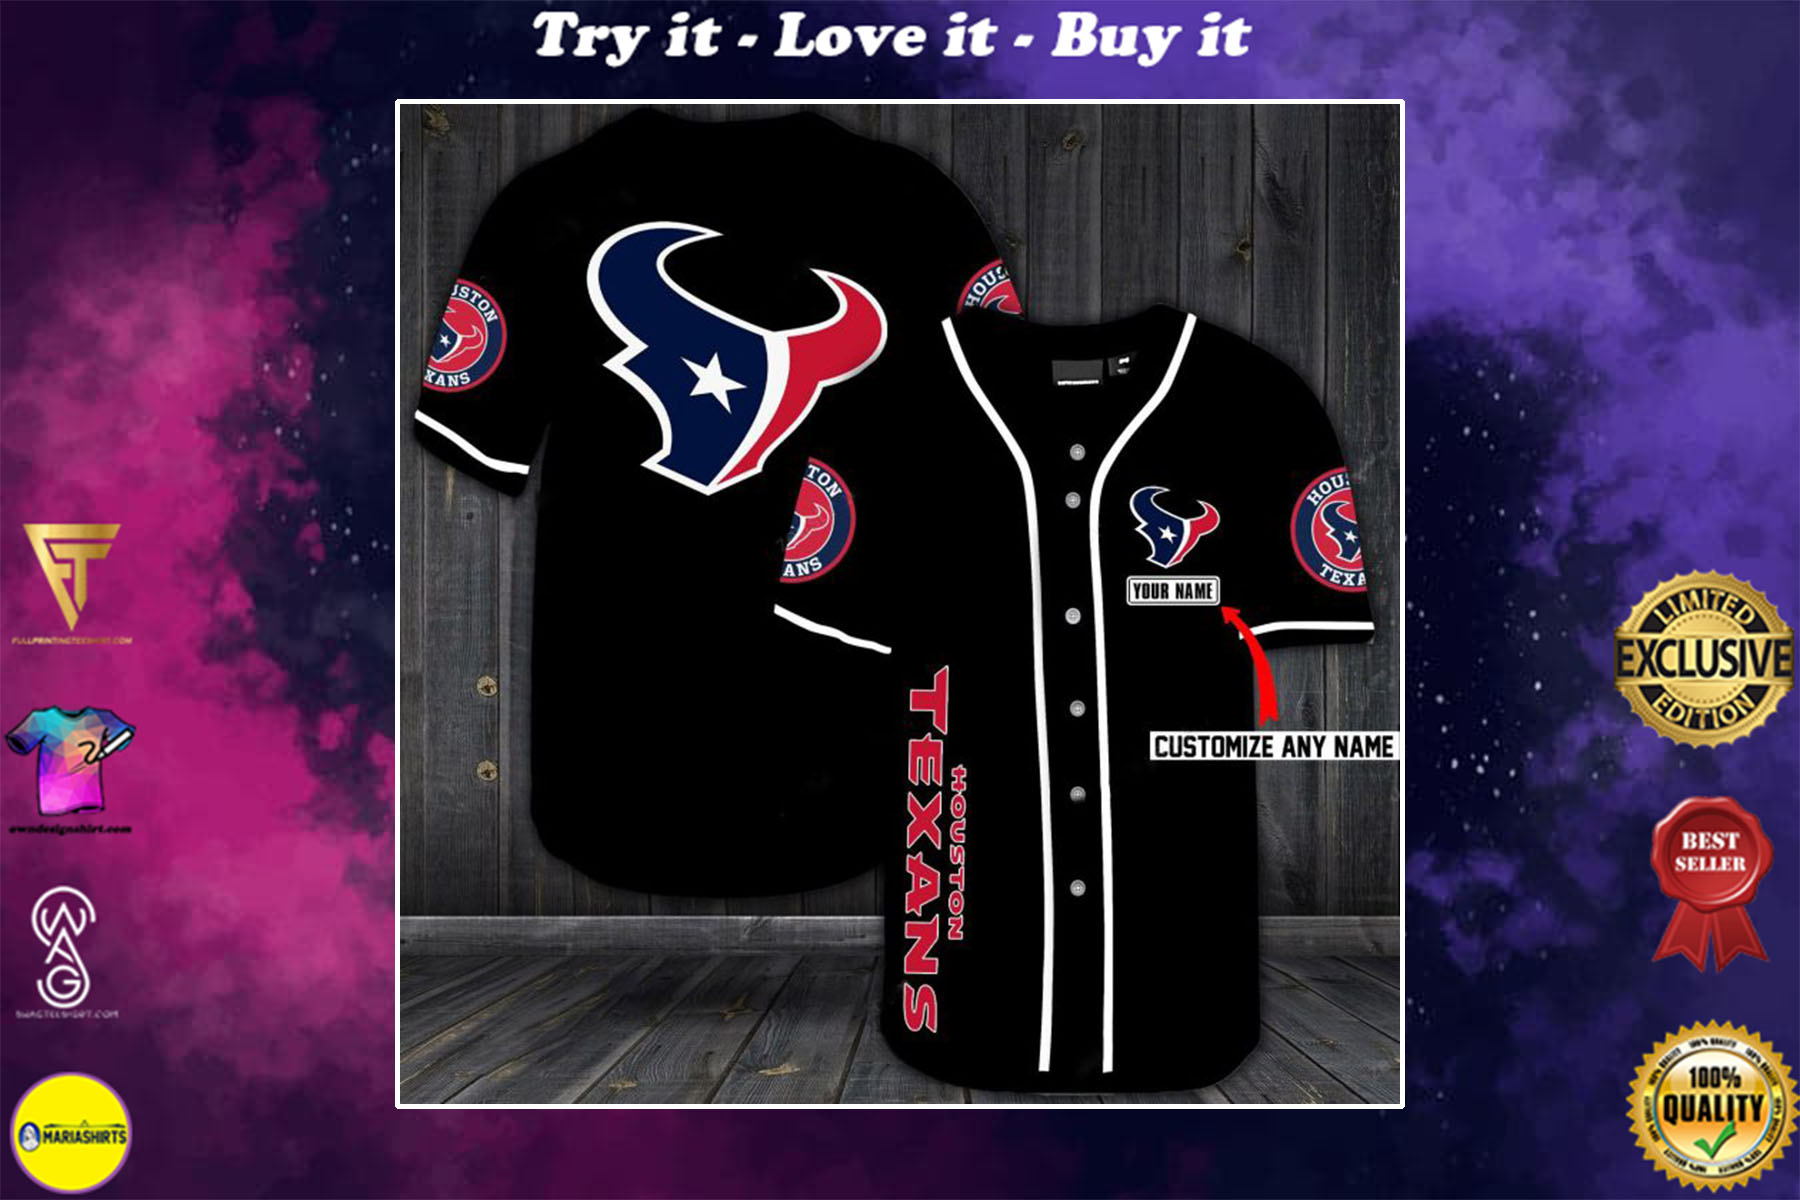 houston texans personalized jersey